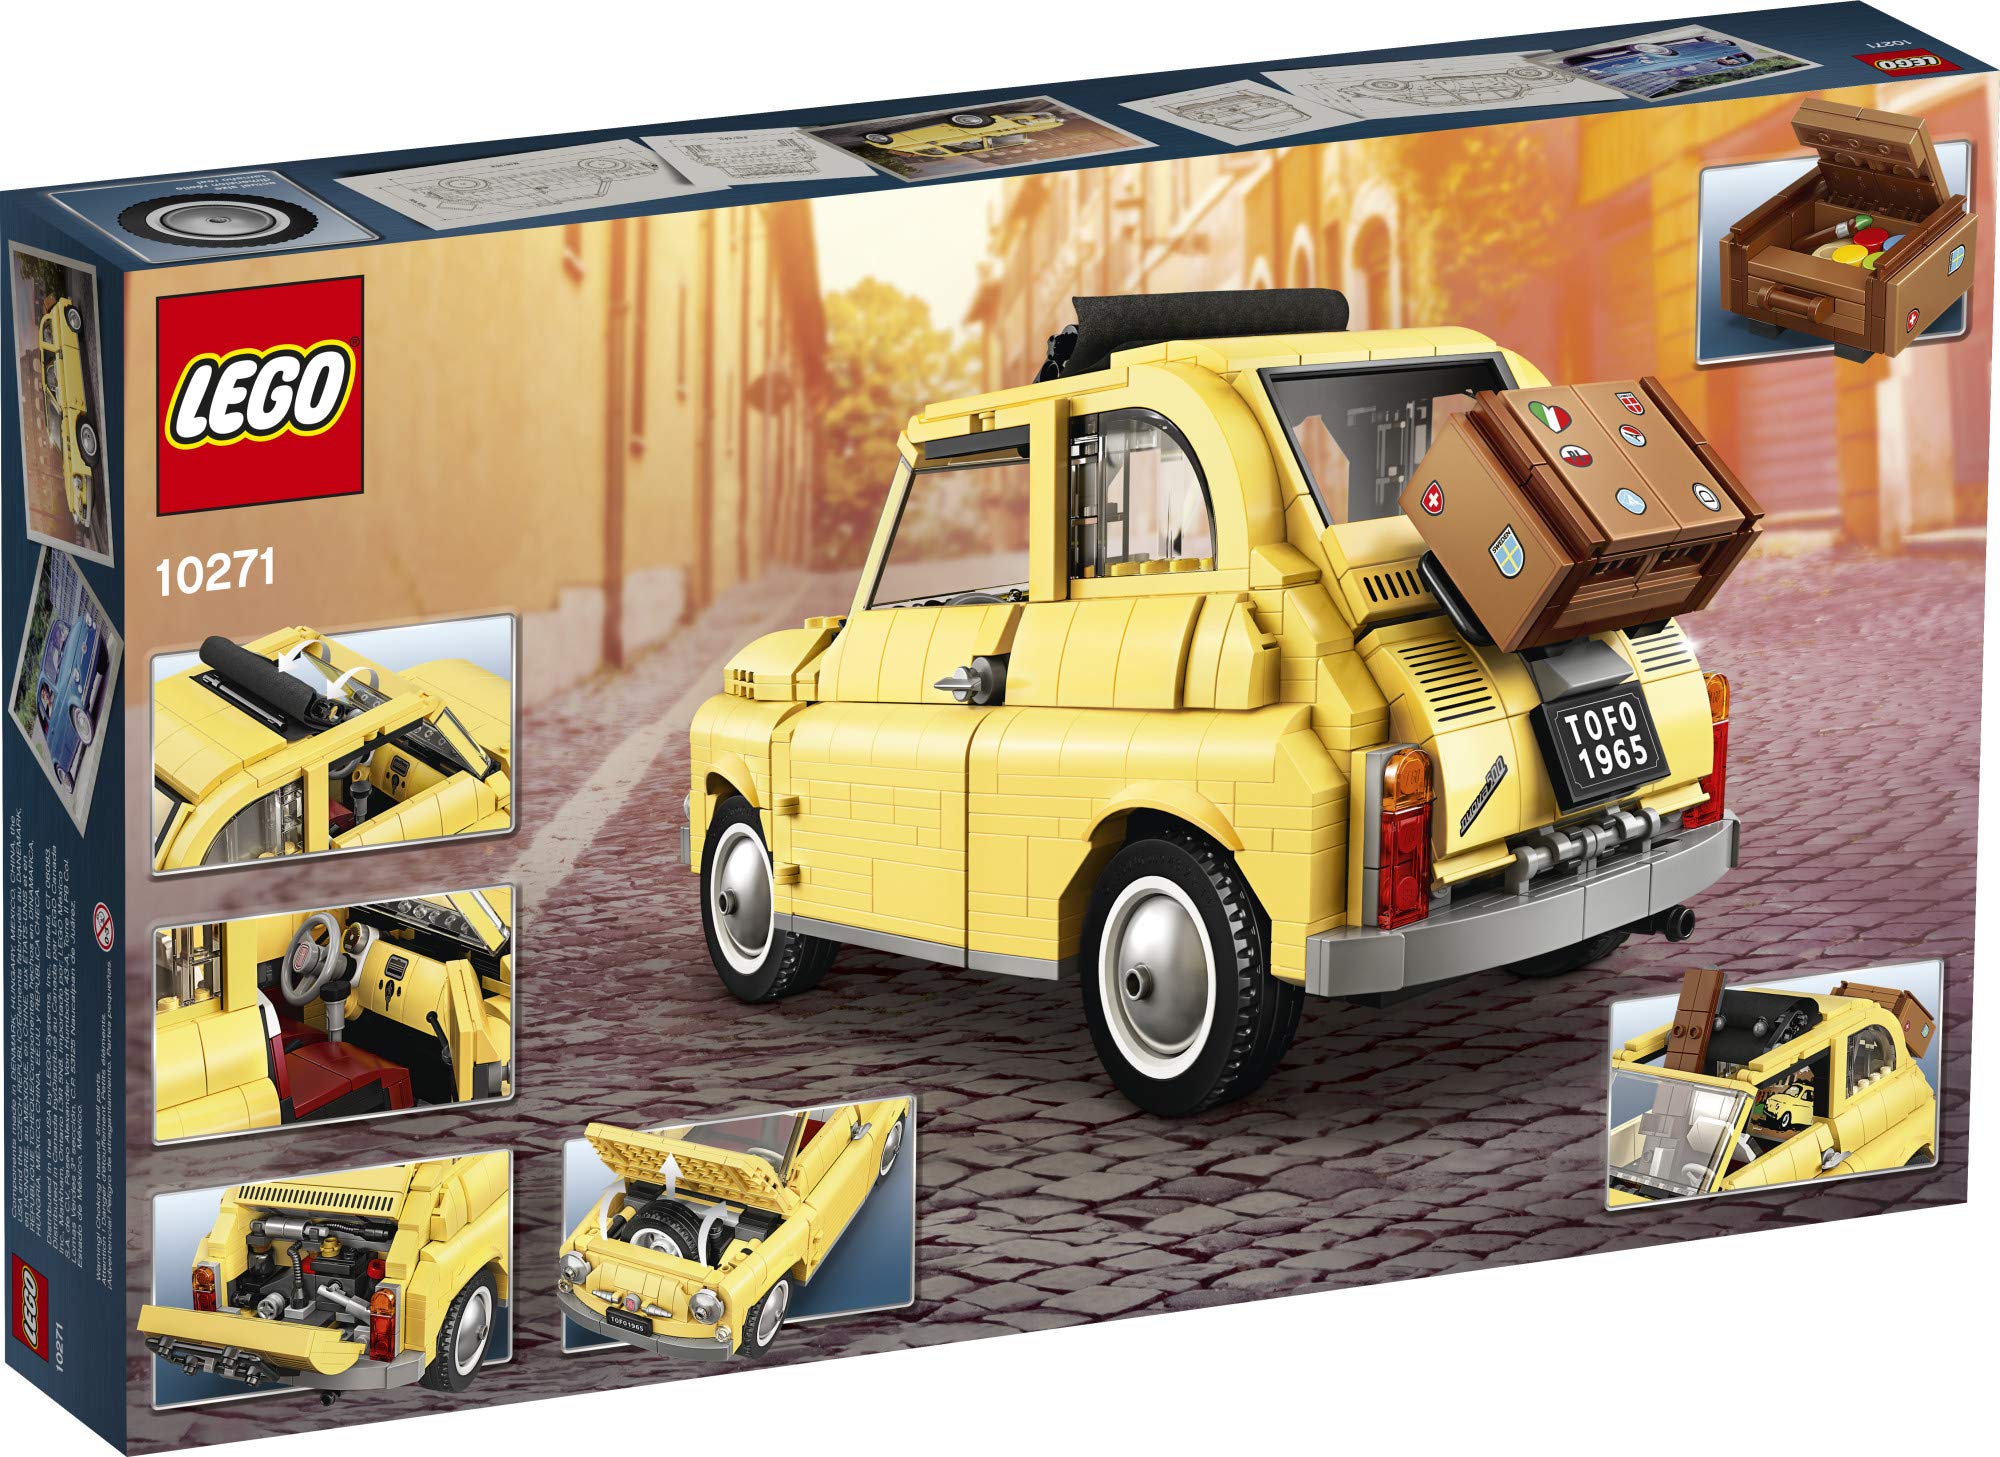 LEGO Creator Expert Fiat 500 10271 Toy Car Building Set for Adults, New 2020 (960 Pieces)